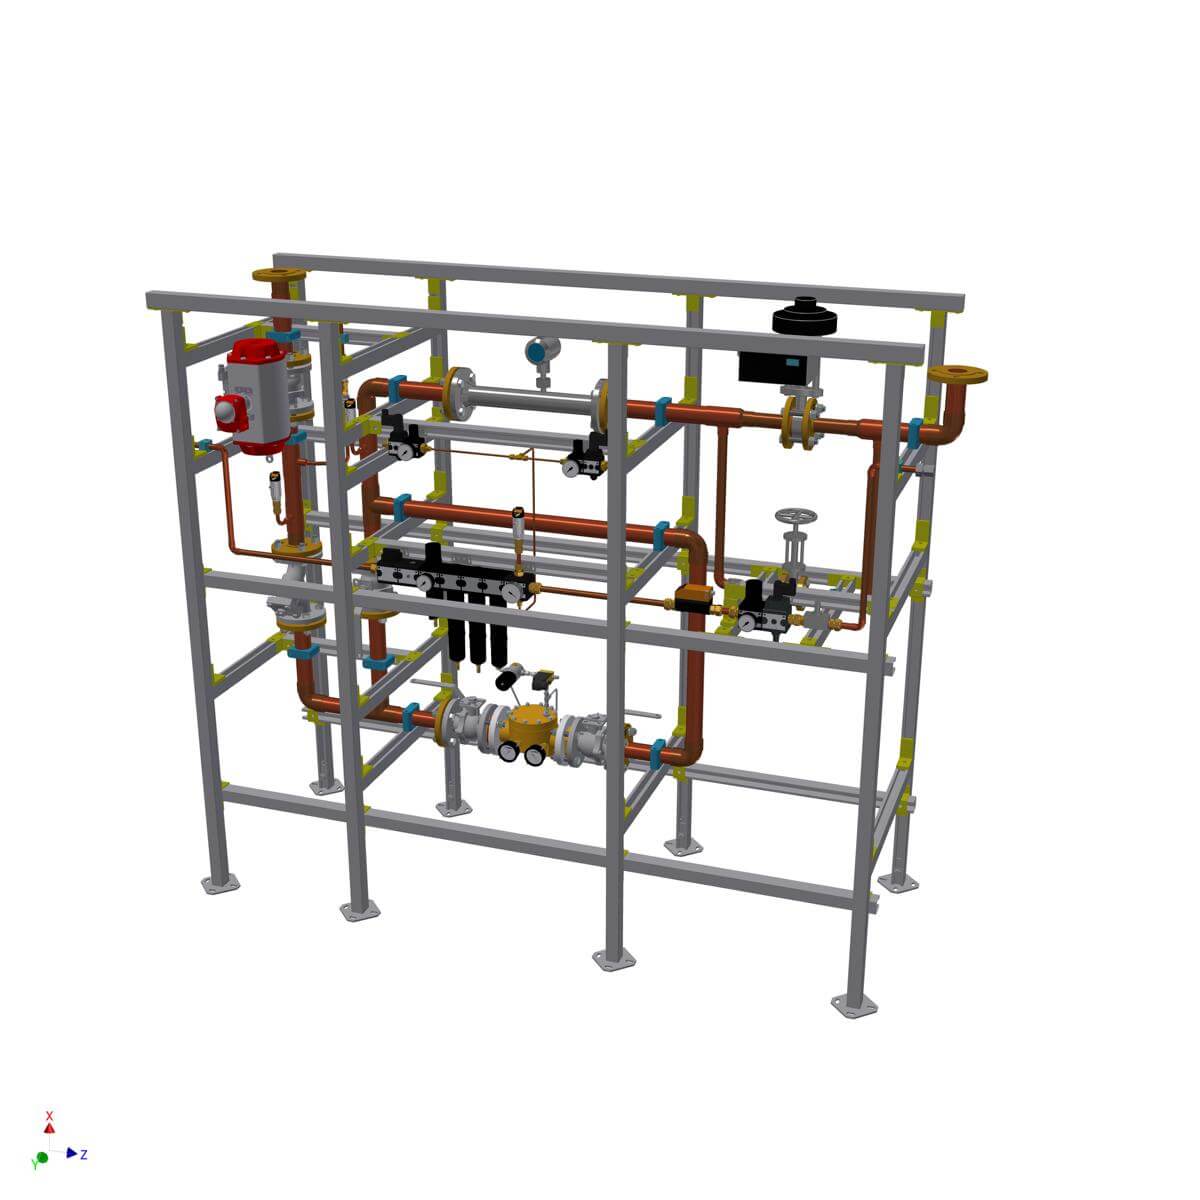 Control system for 600 Nm³/h oxygen to supply a burner on a cement rotary kiln